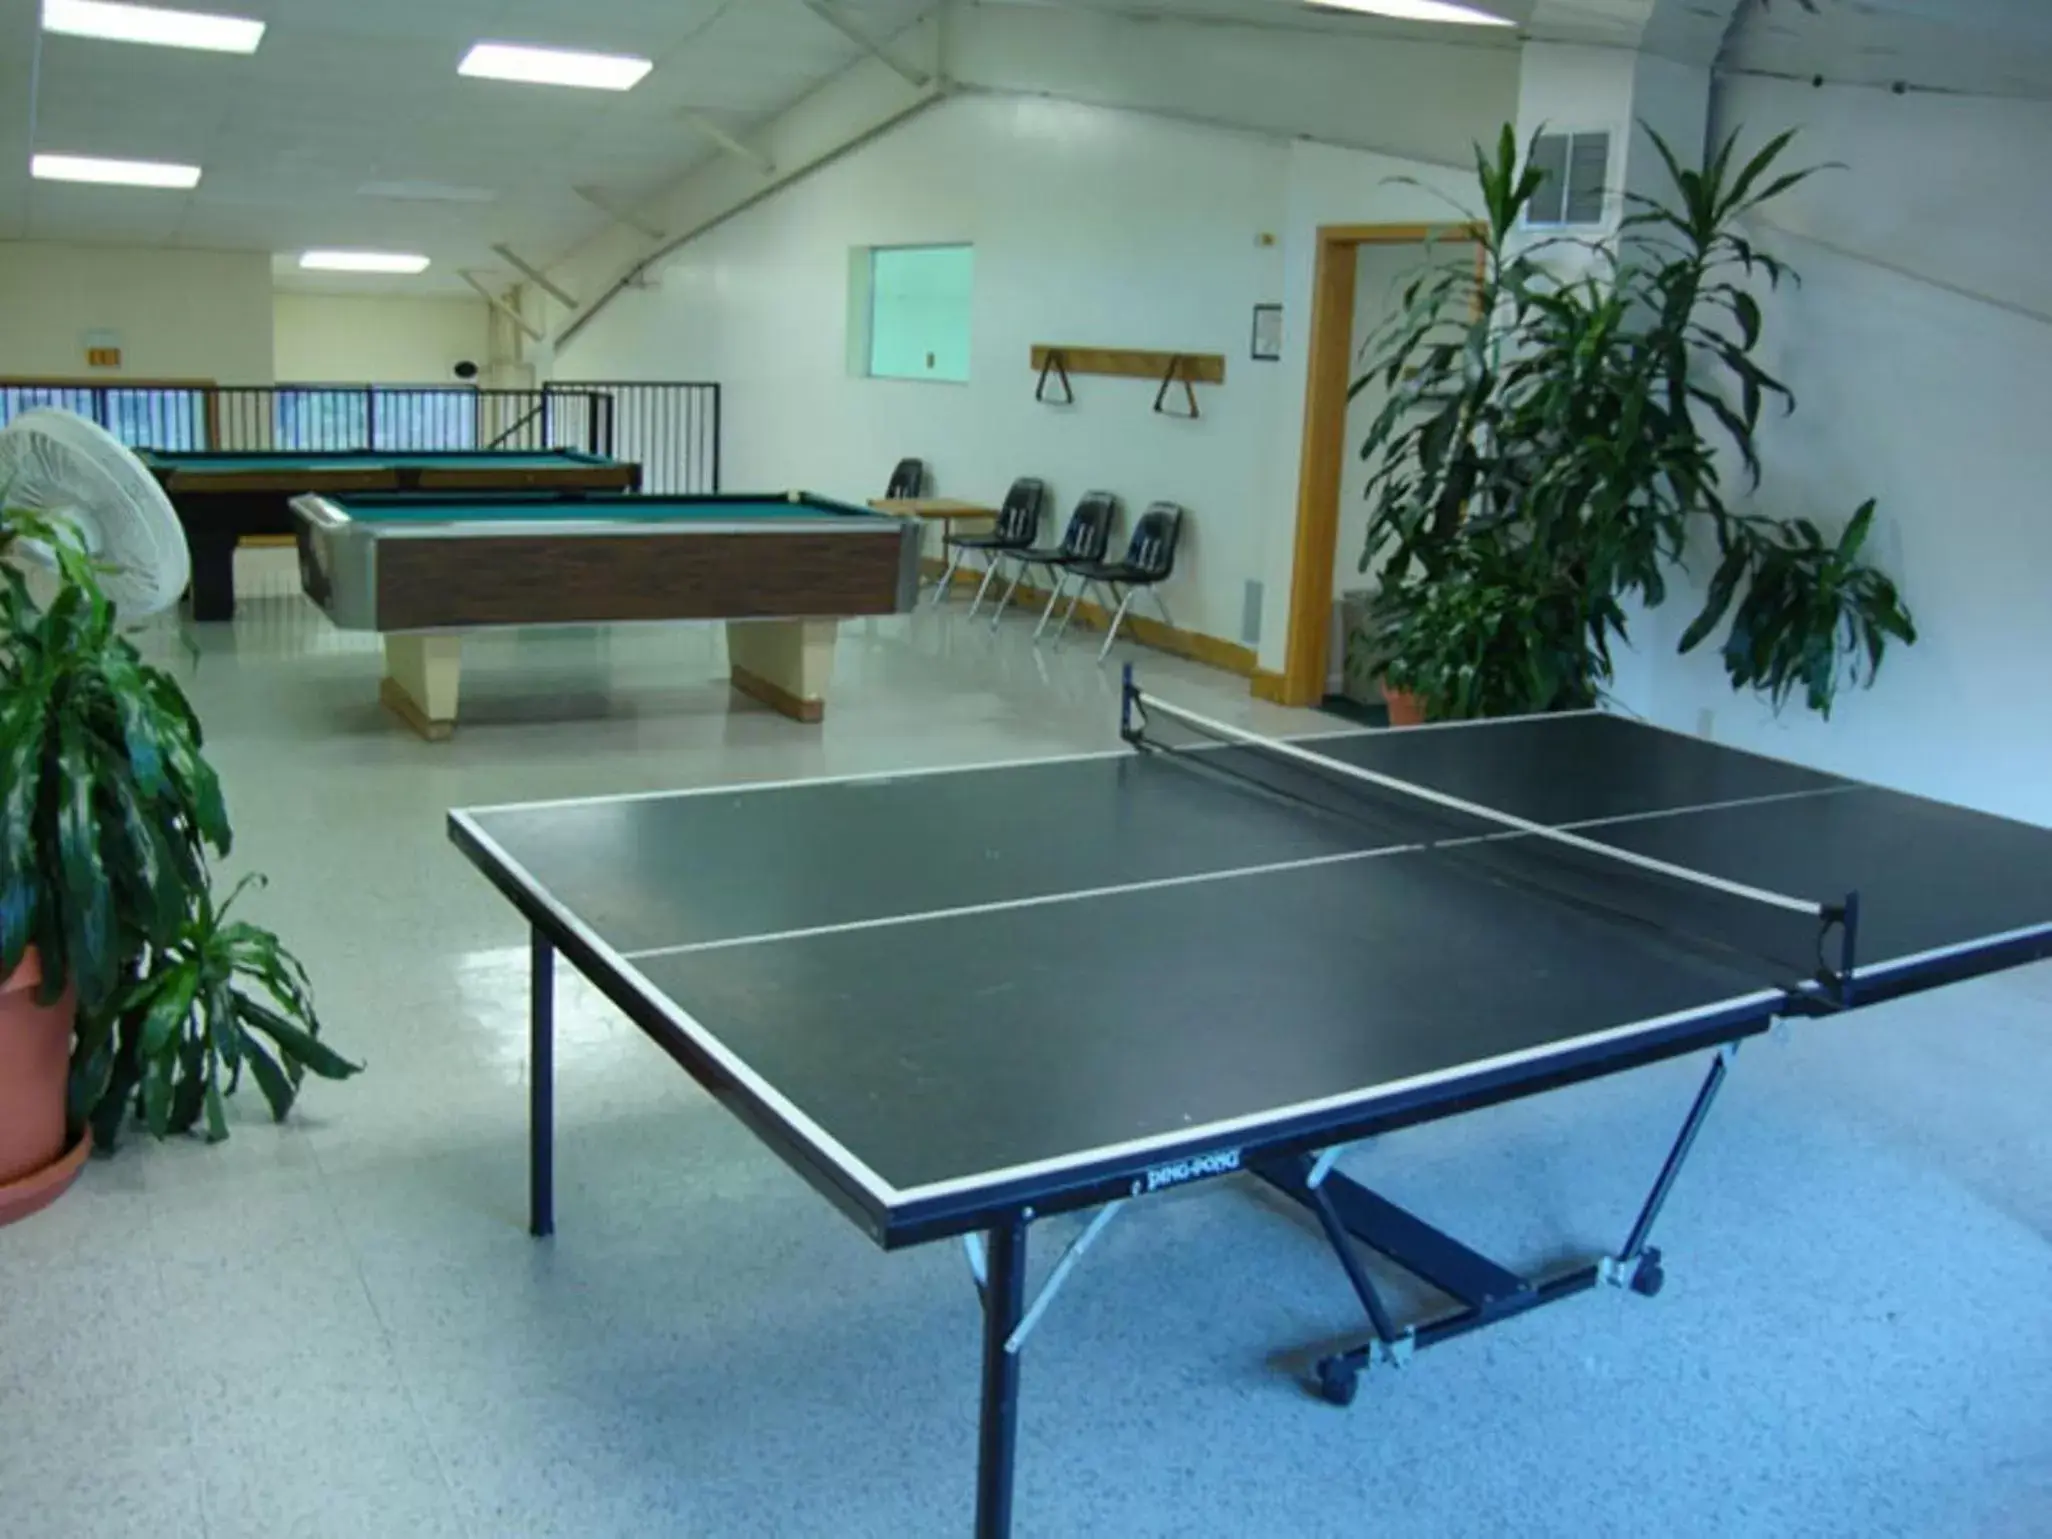 Table Tennis in Roundhouse Resort, a VRI resort